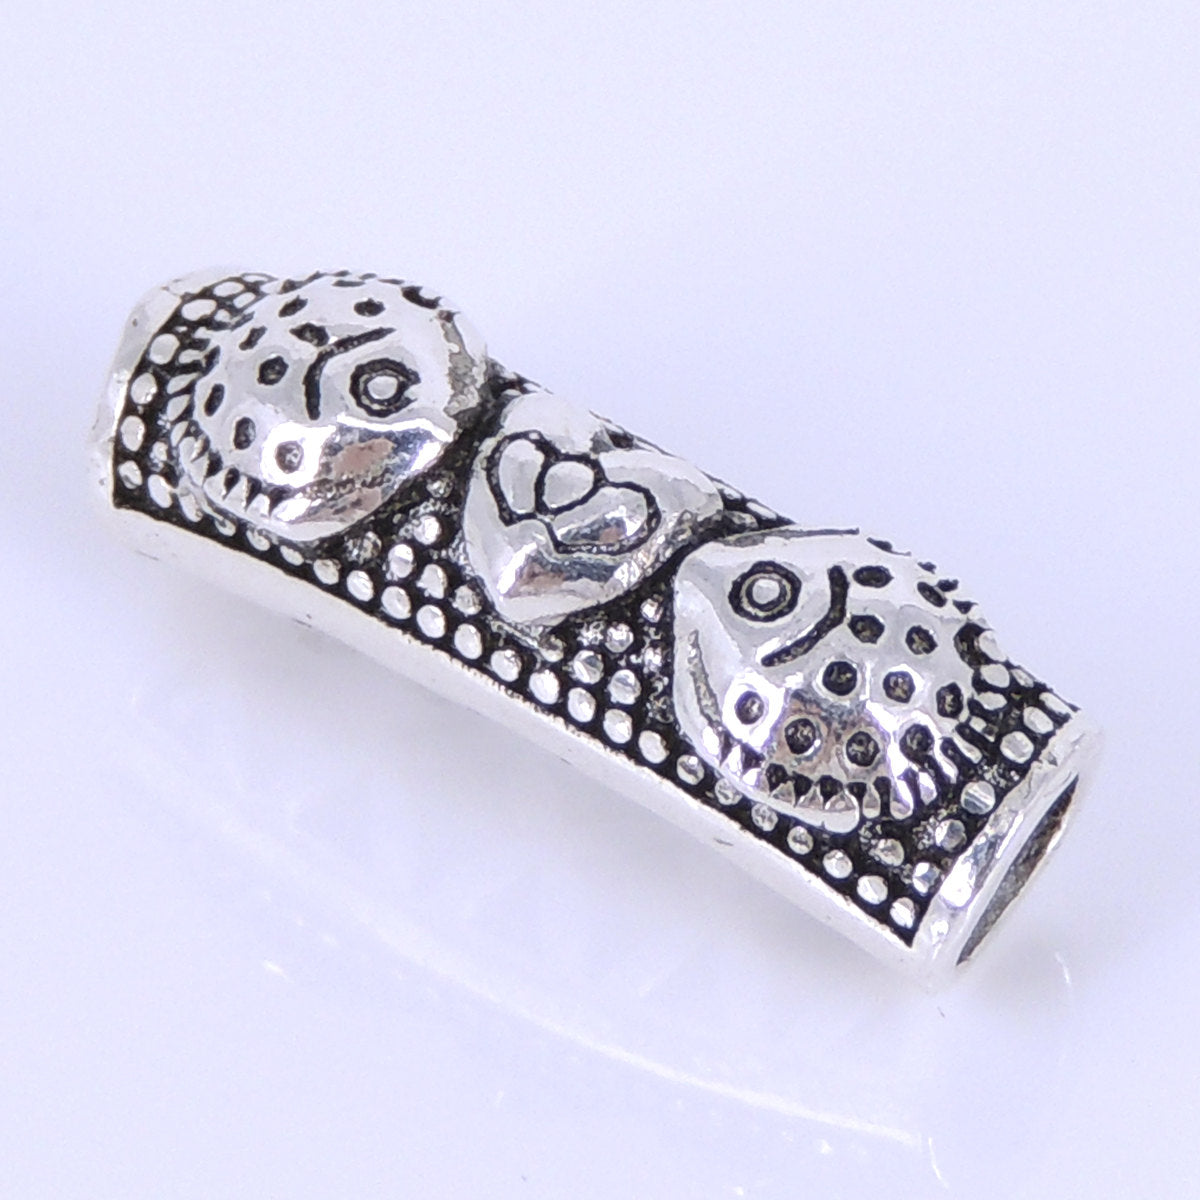 1 PC Adorable Kissing Fish Charm - Genuine S925 Sterling Silver